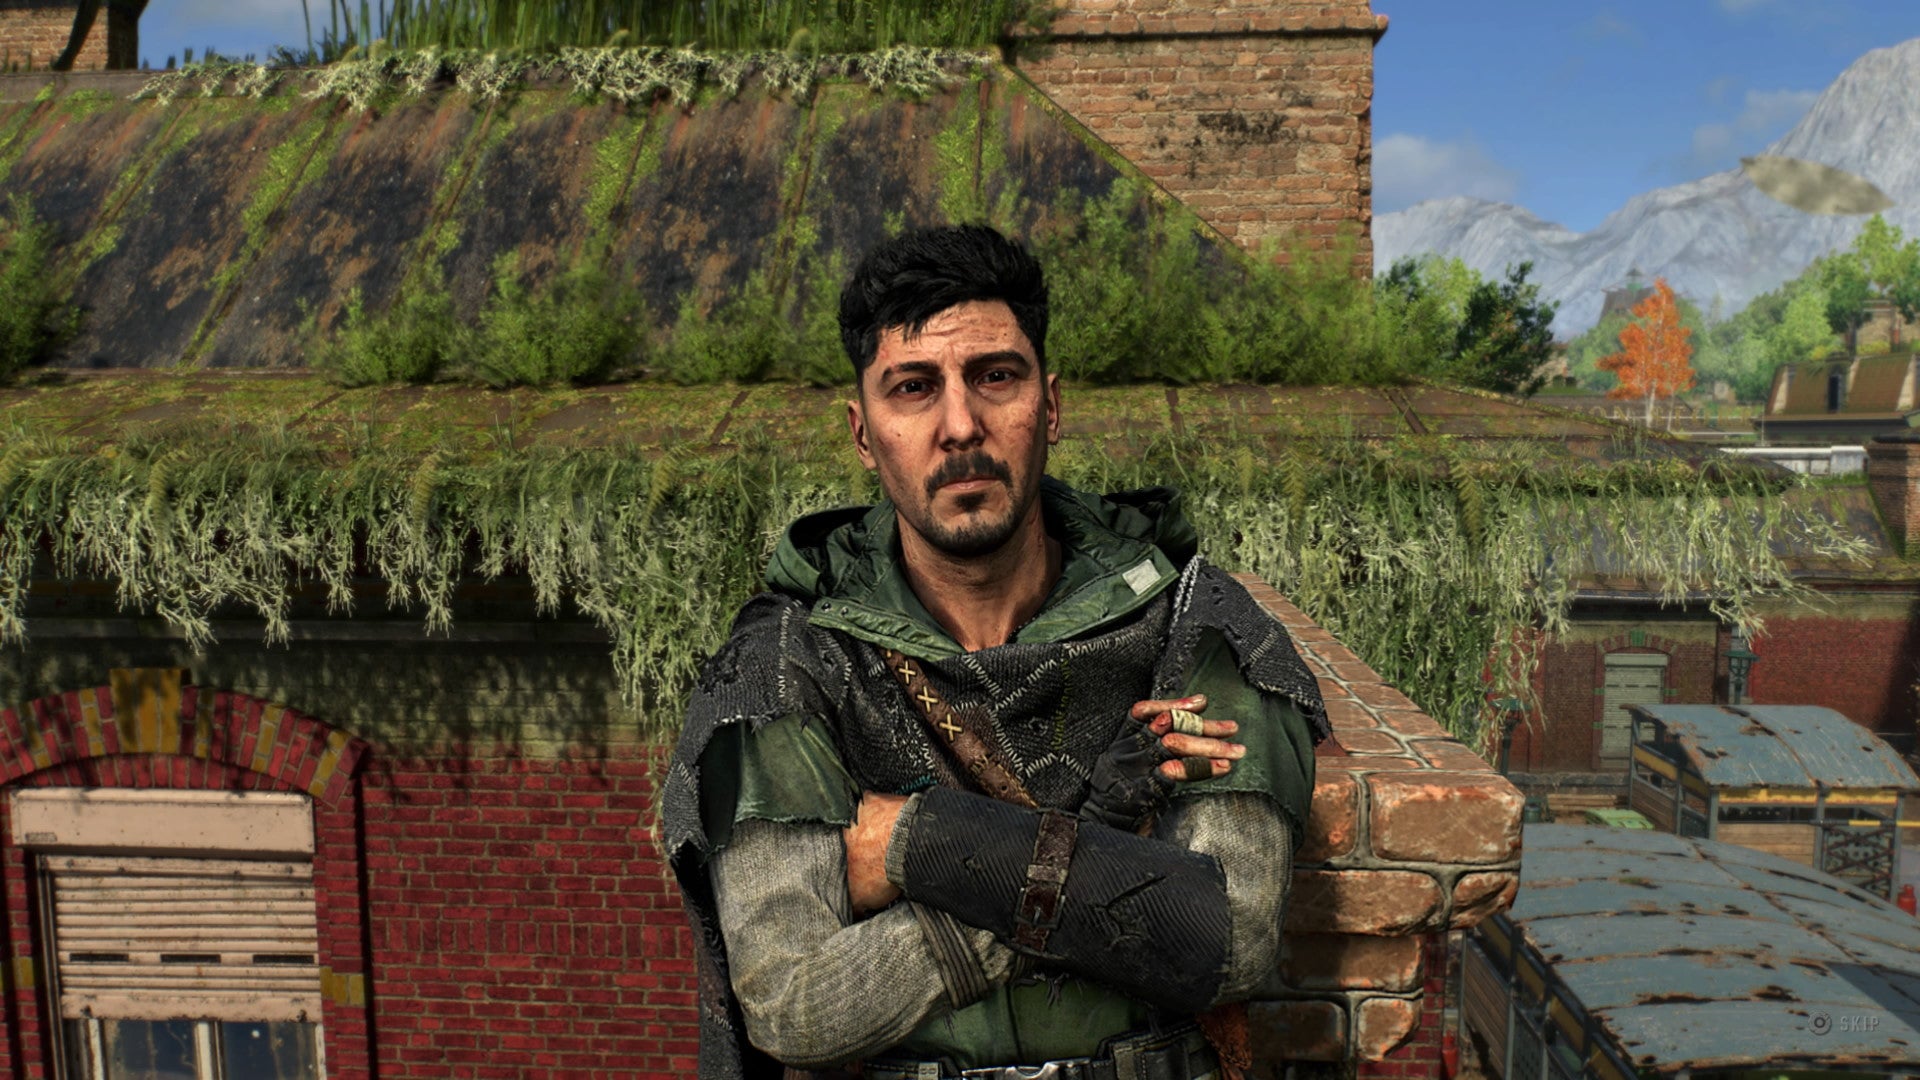 Hakon leans against a grassy building in Dying Light 2